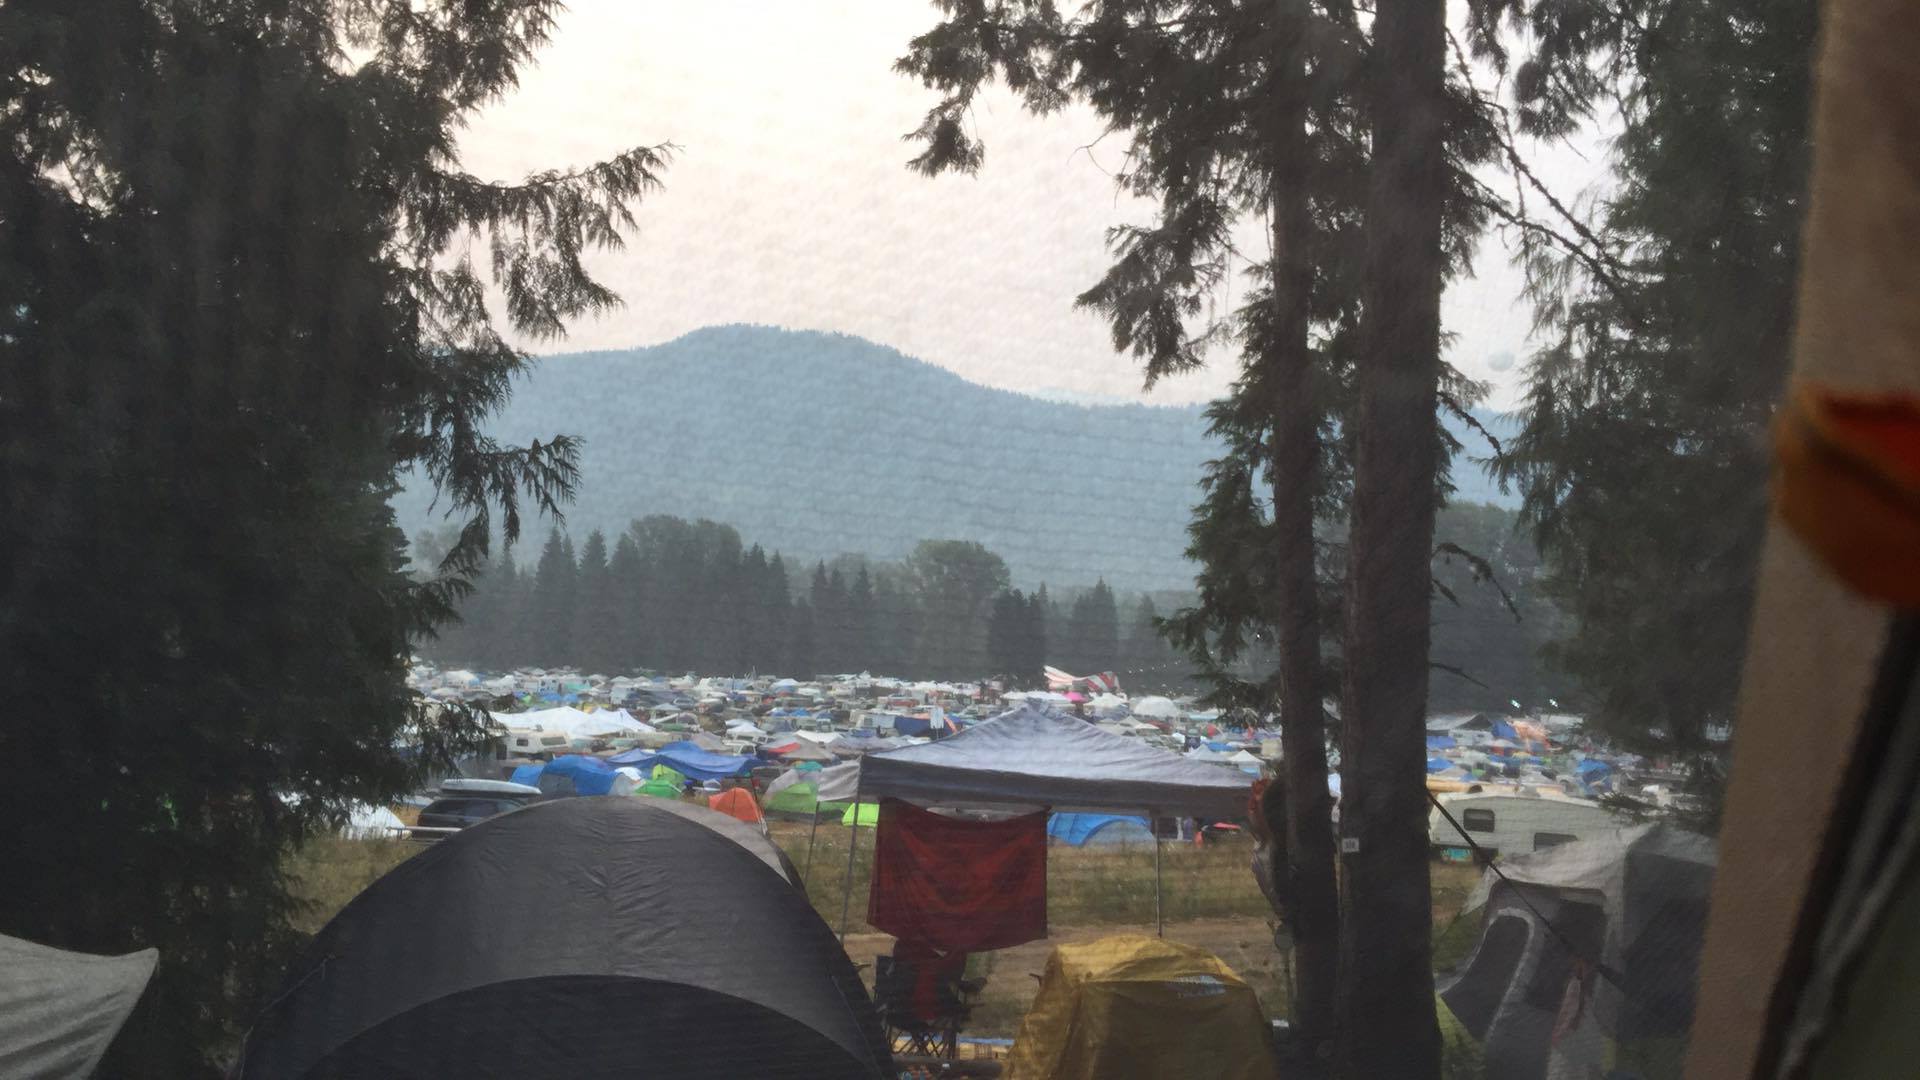 UPDATED: EVACUATION ORDER Issued for Nelway Area, EVACUATION ALERT now includes Shambhala Music Festival after McCormick Creek Wildfire jumps Salmo River